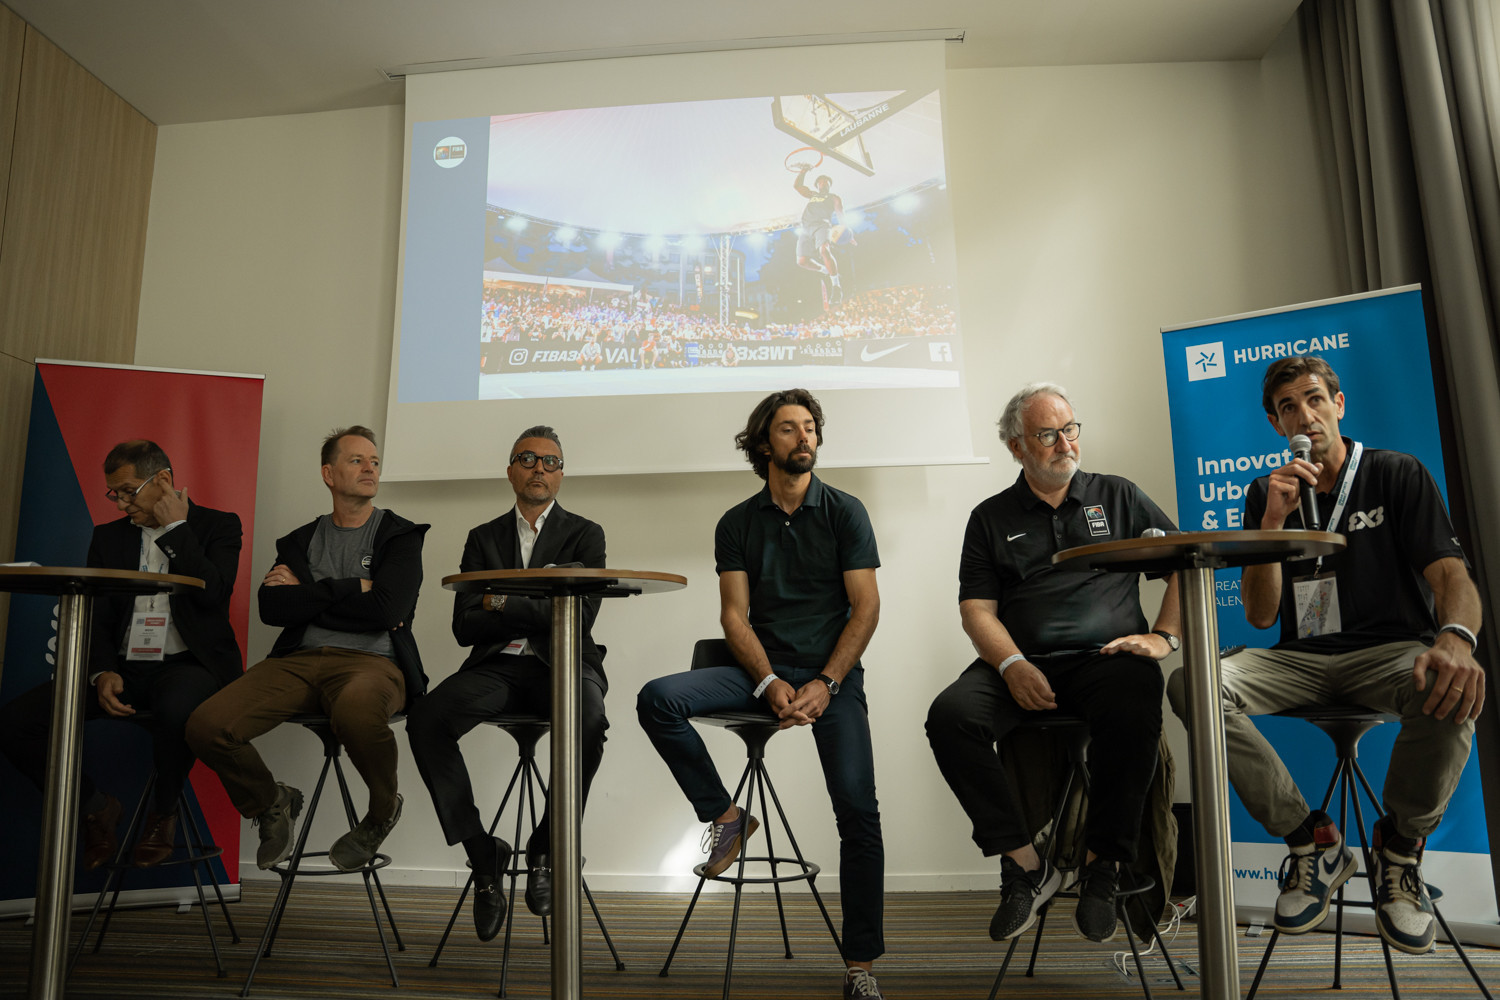 The Urban Sports Summit is held with the aim of connecting key decision-makers in the sports business to develop urban sports ©Hurricane - FISE